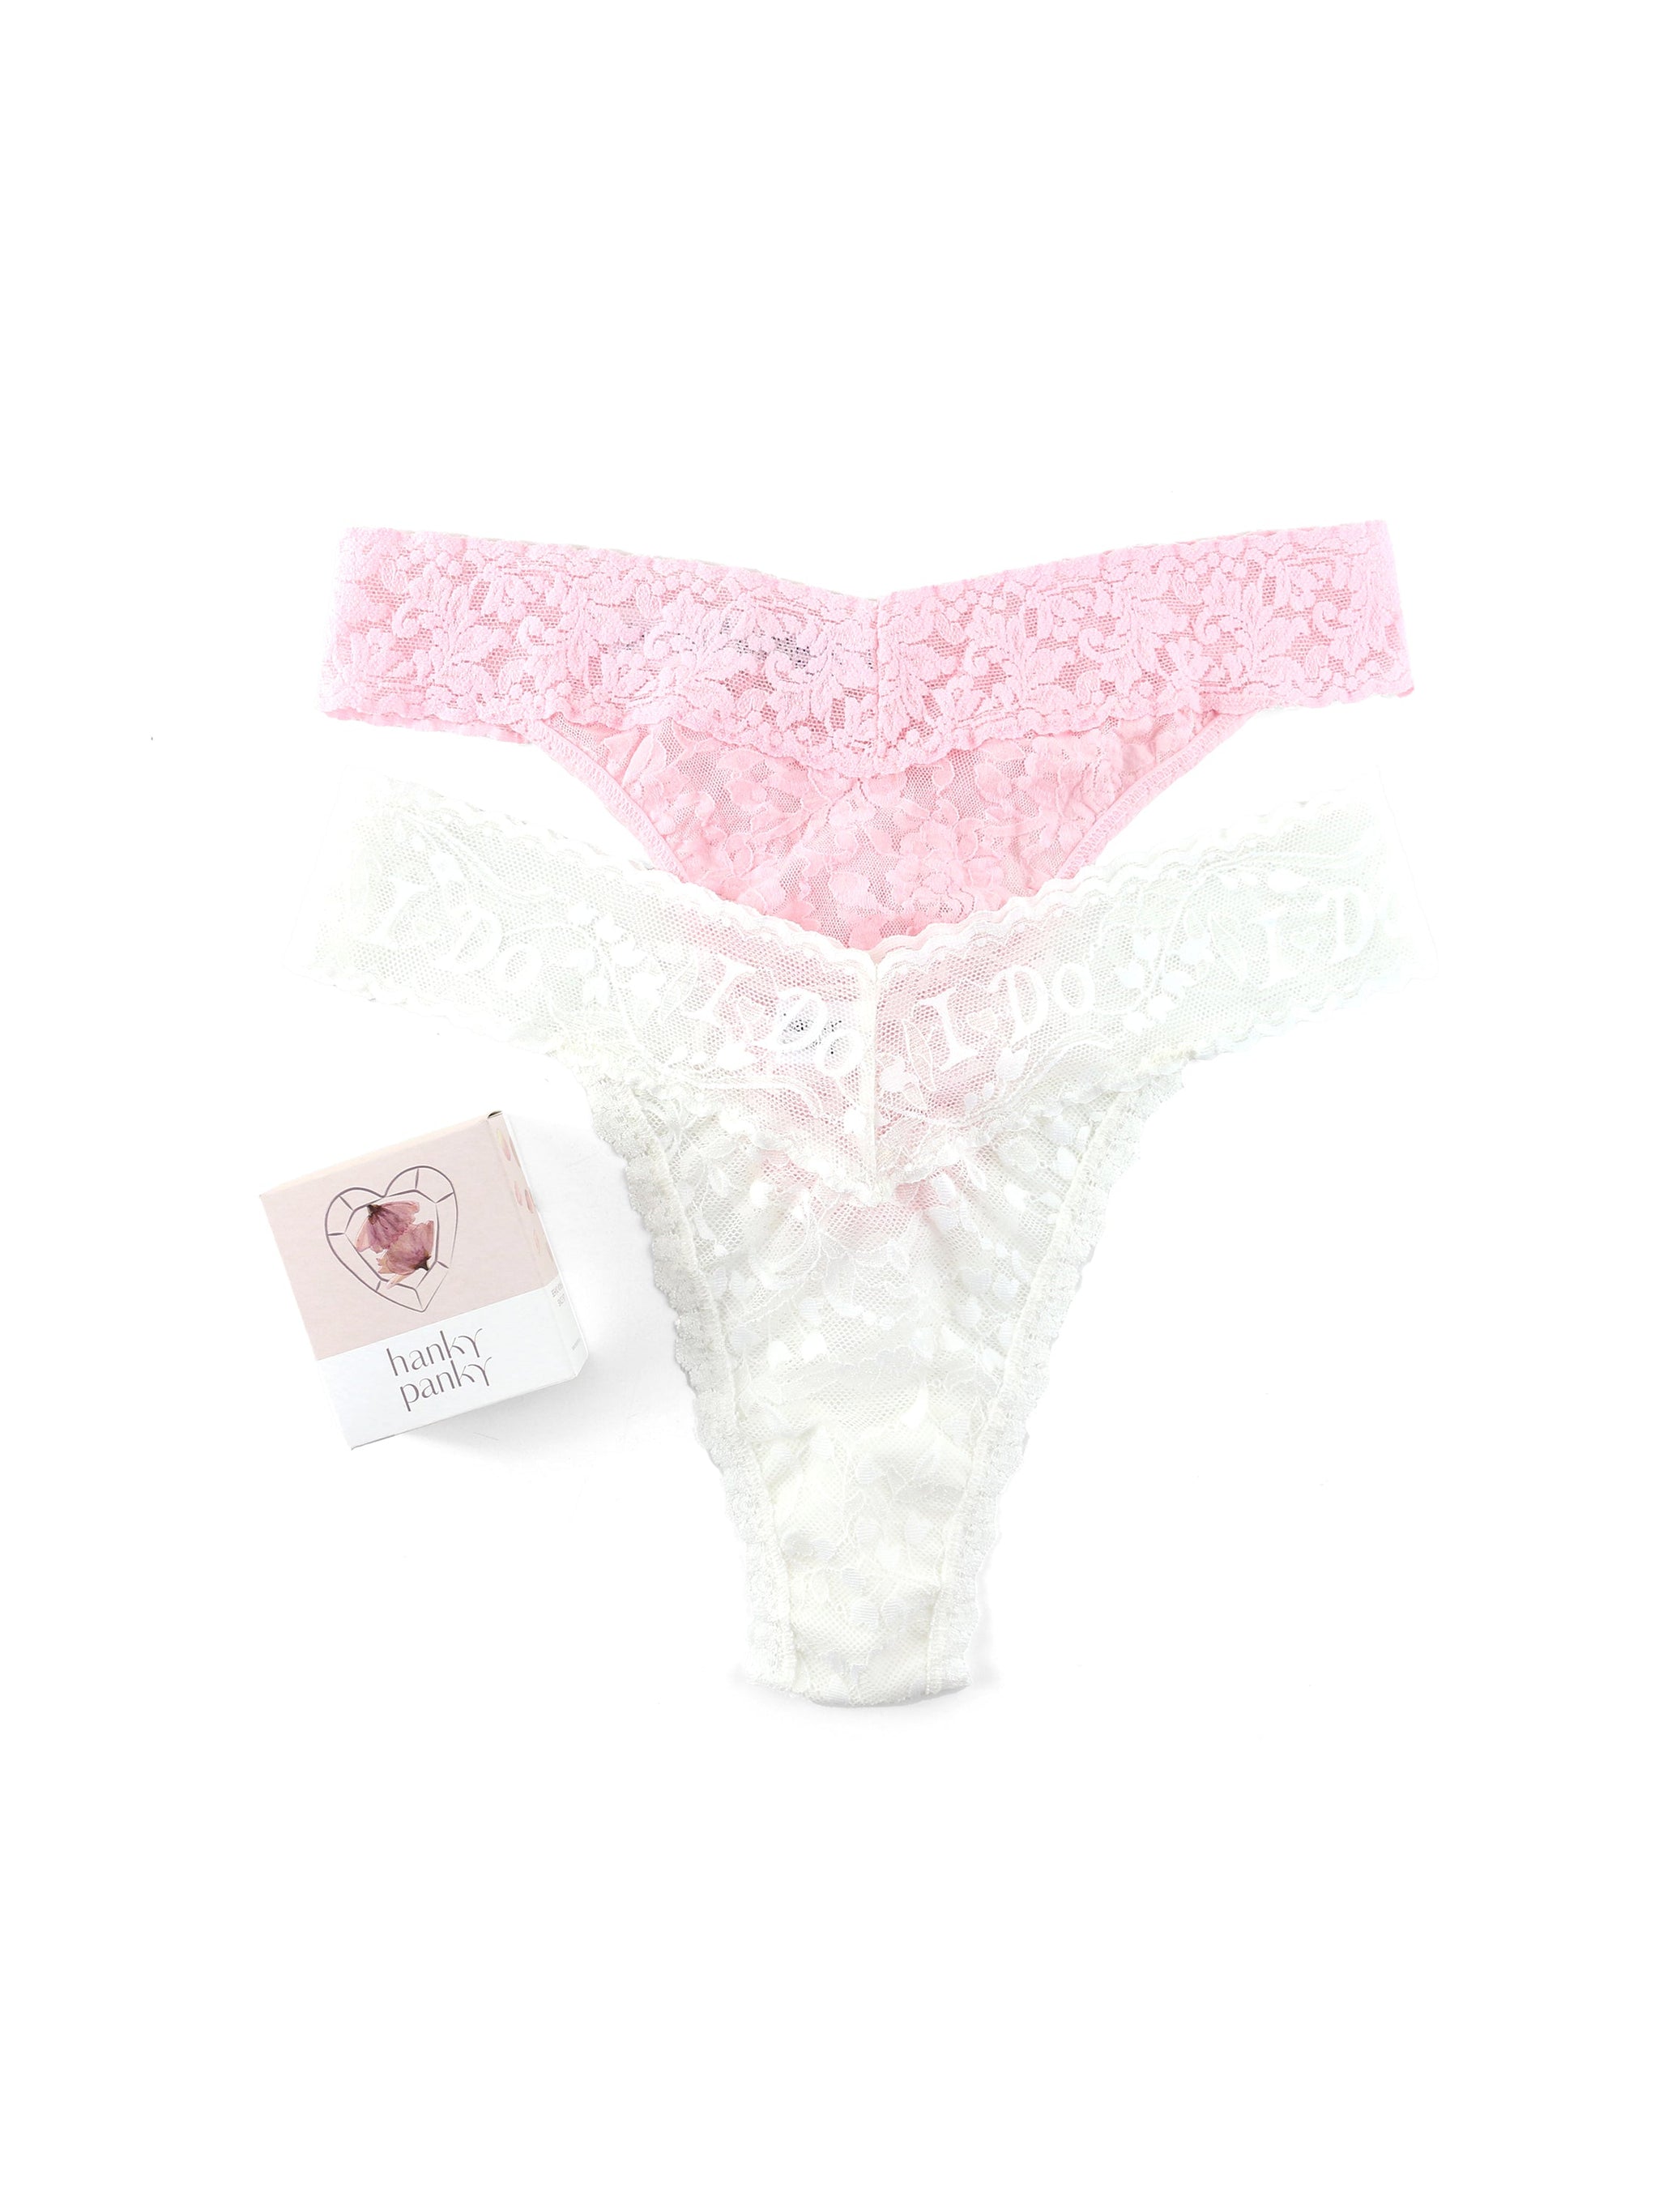 Valentines Lingerie Set Sexy Lace Thong And Crotch Thong Underwear For Women  With Comfortable Low Fit And Cotton Bandage From Tiangouu, $20.69